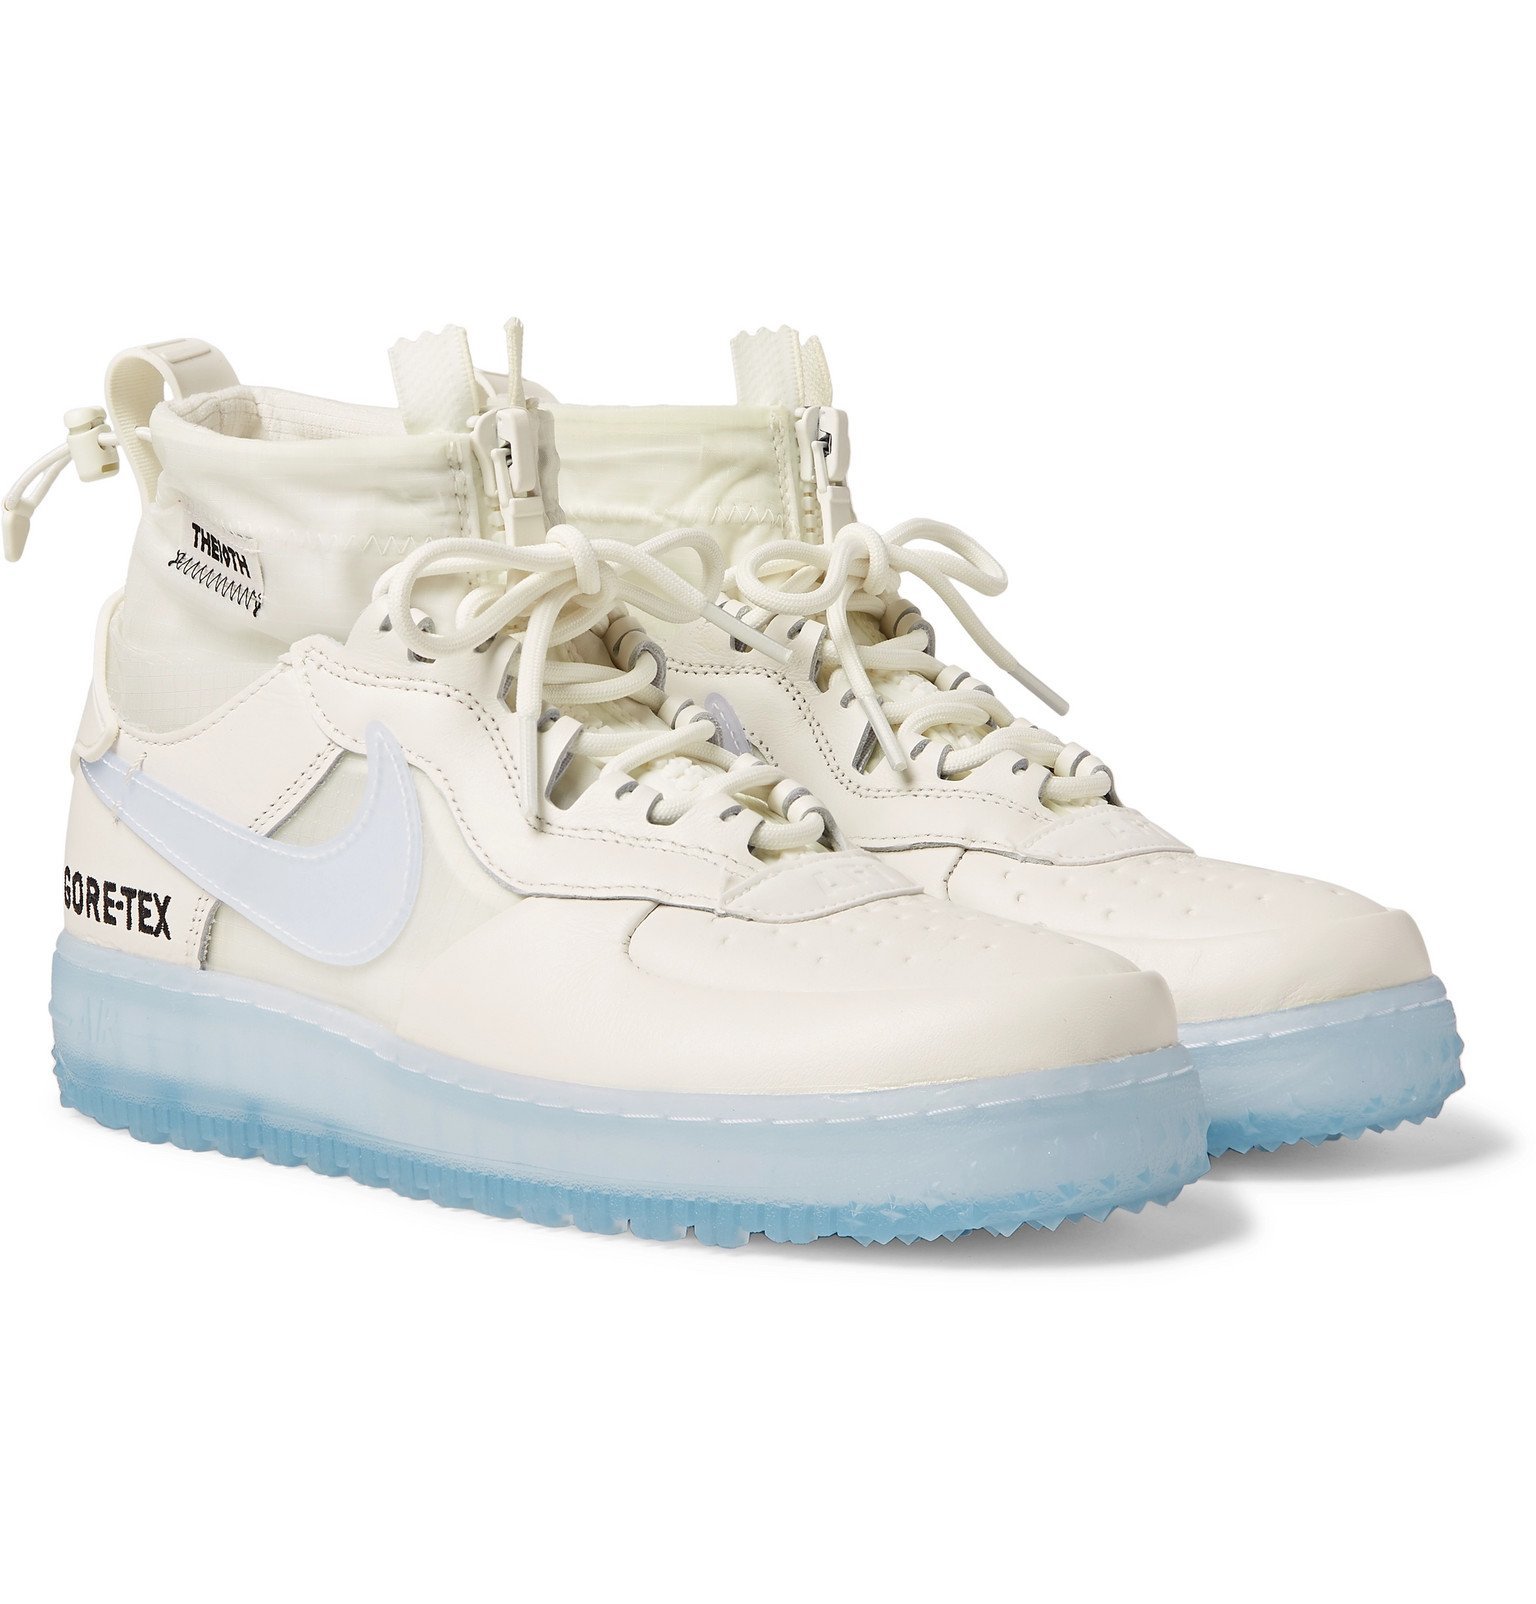 Nike - Air Force 1 Winter GORE-TEX and 